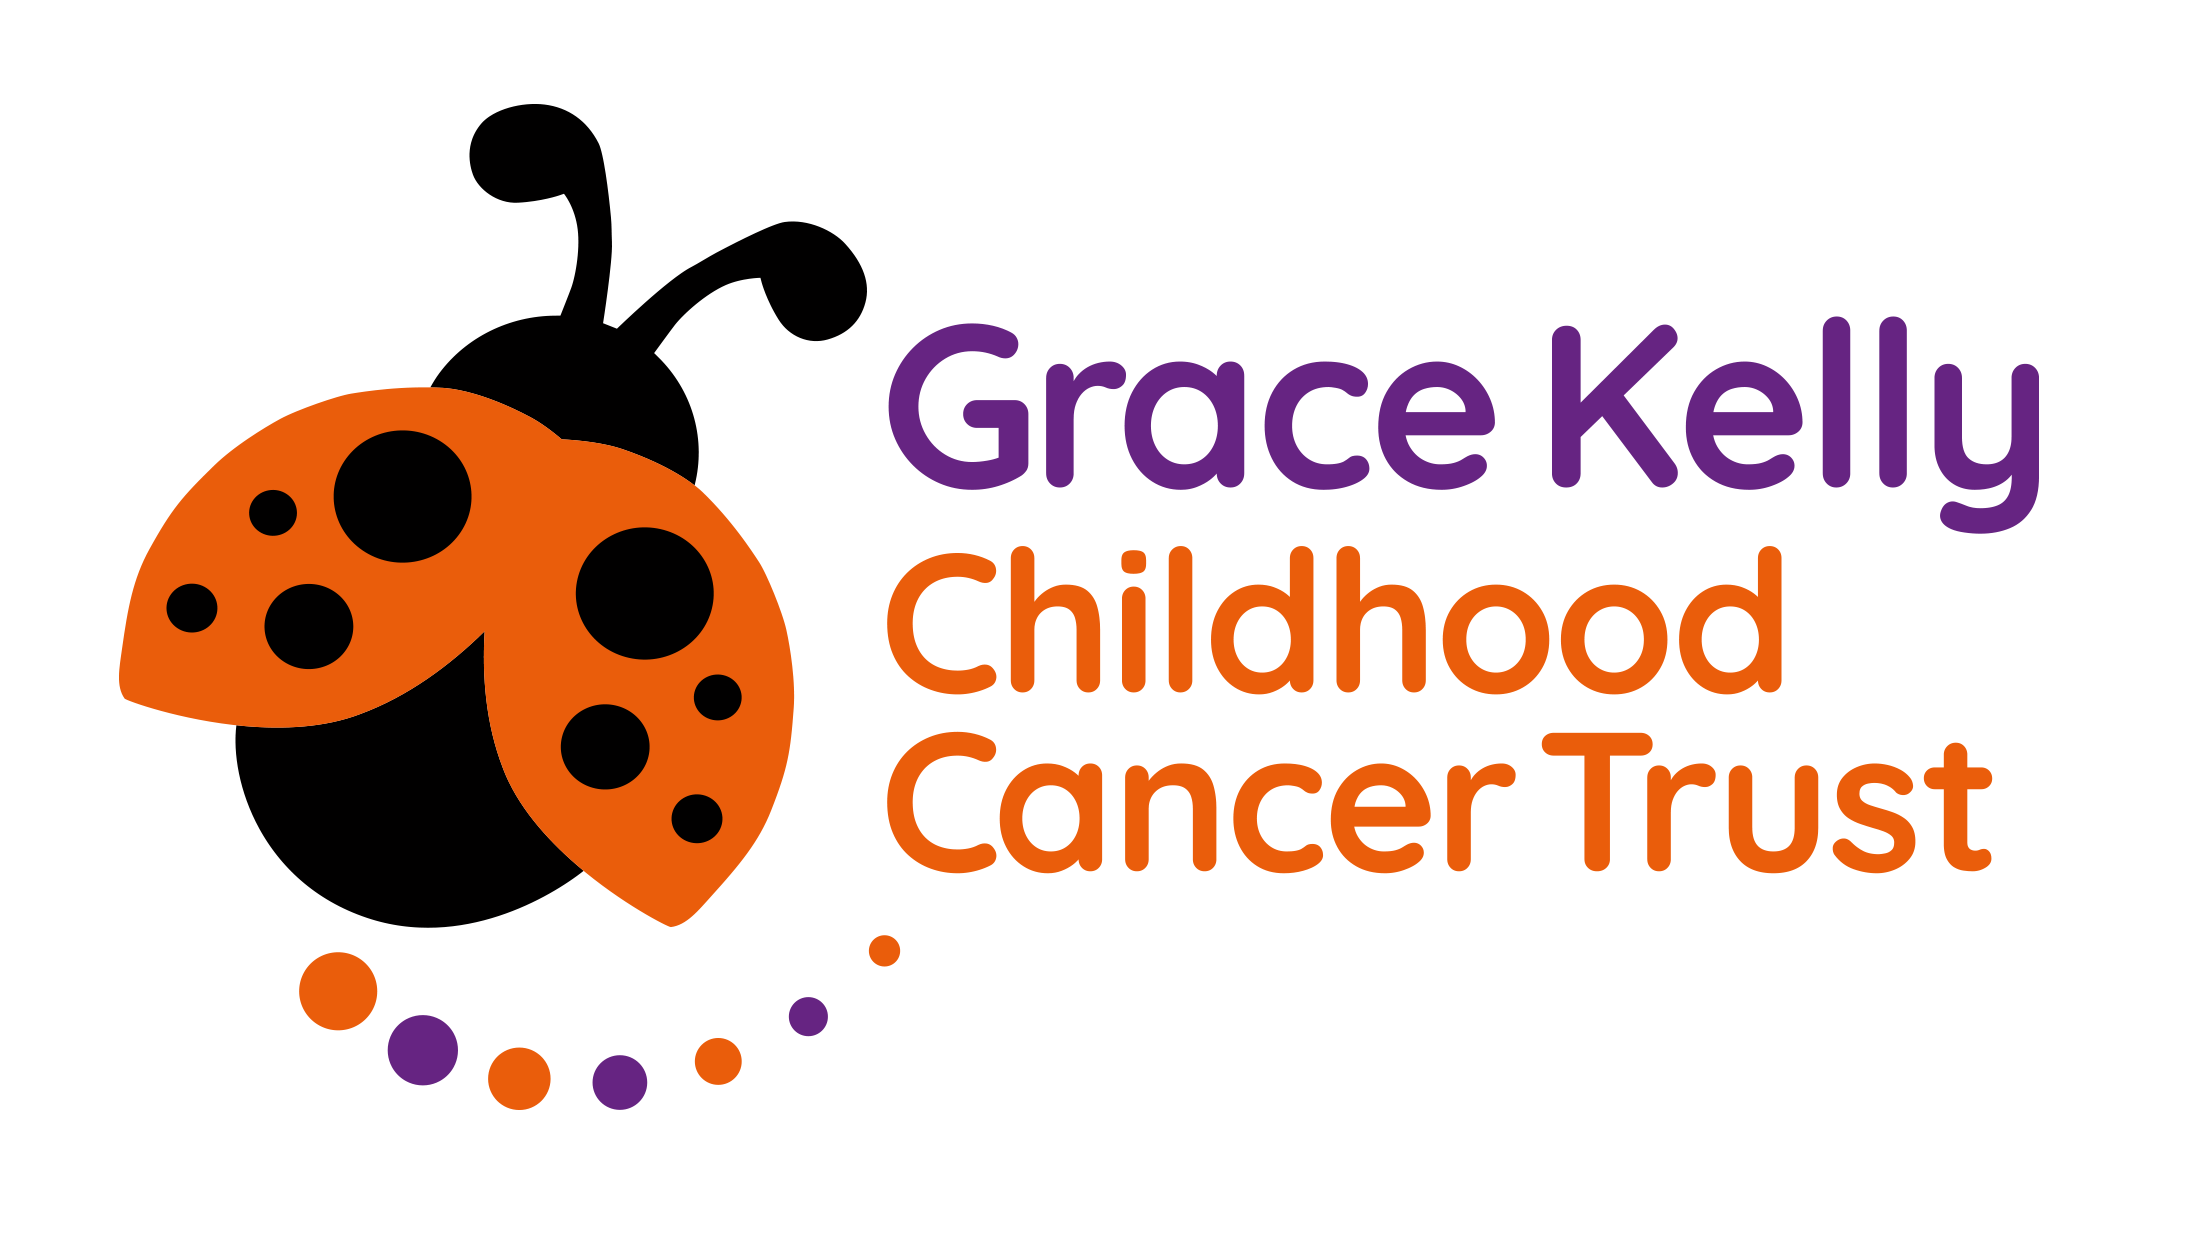 The Grace Kelly Childhood Cancer Trust logo includes the name and an illustration of a ladybird.